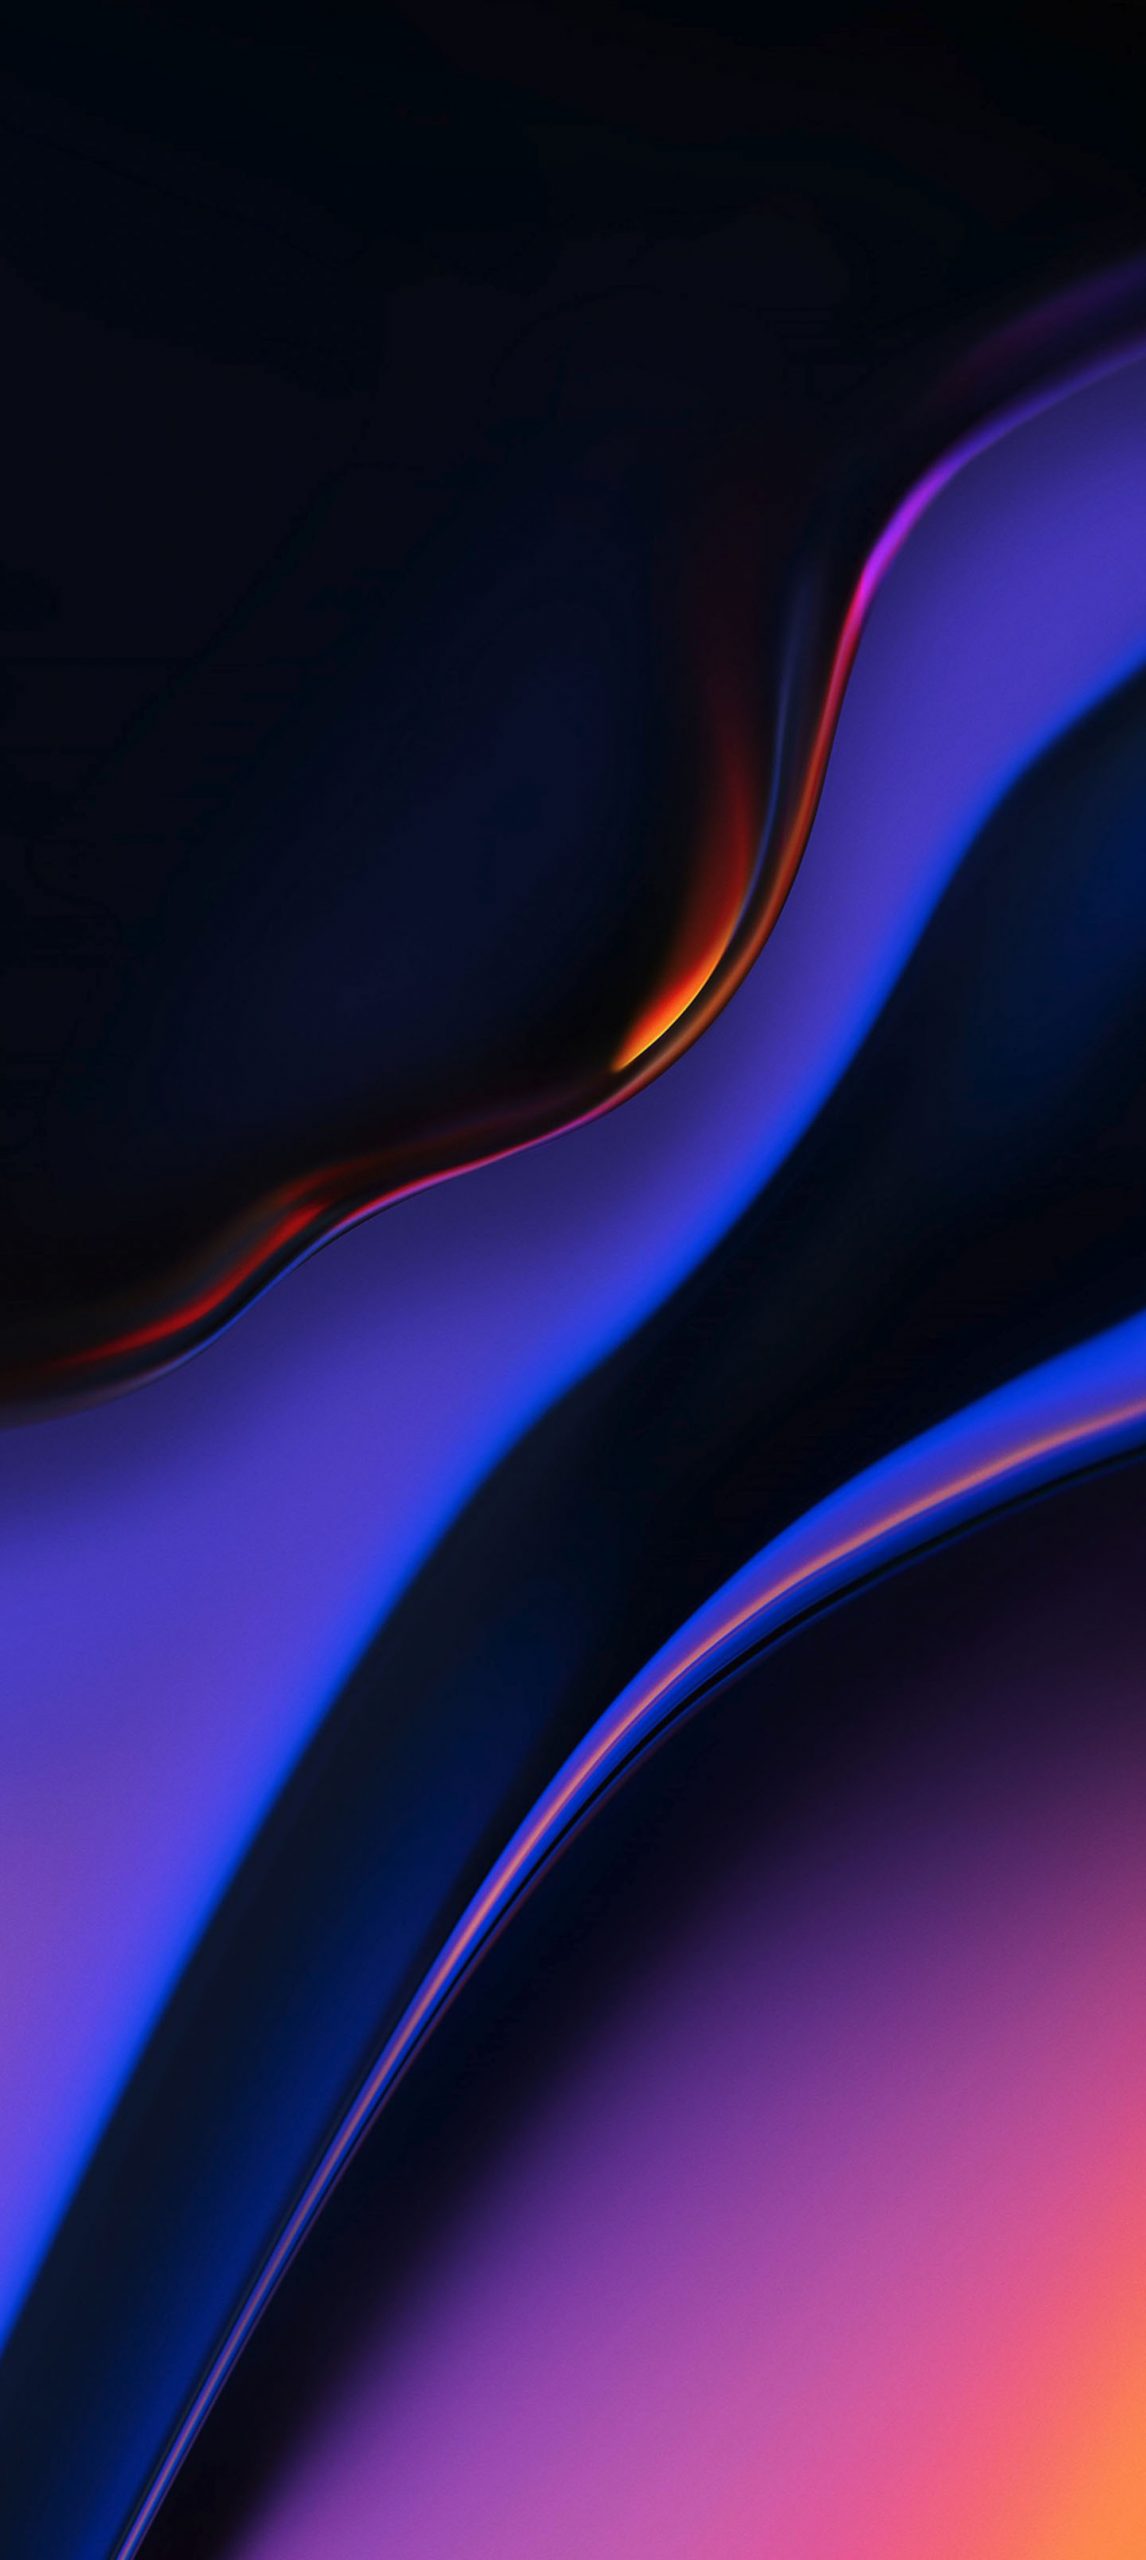 23 OnePlus Wallpapers You Can Download for Free